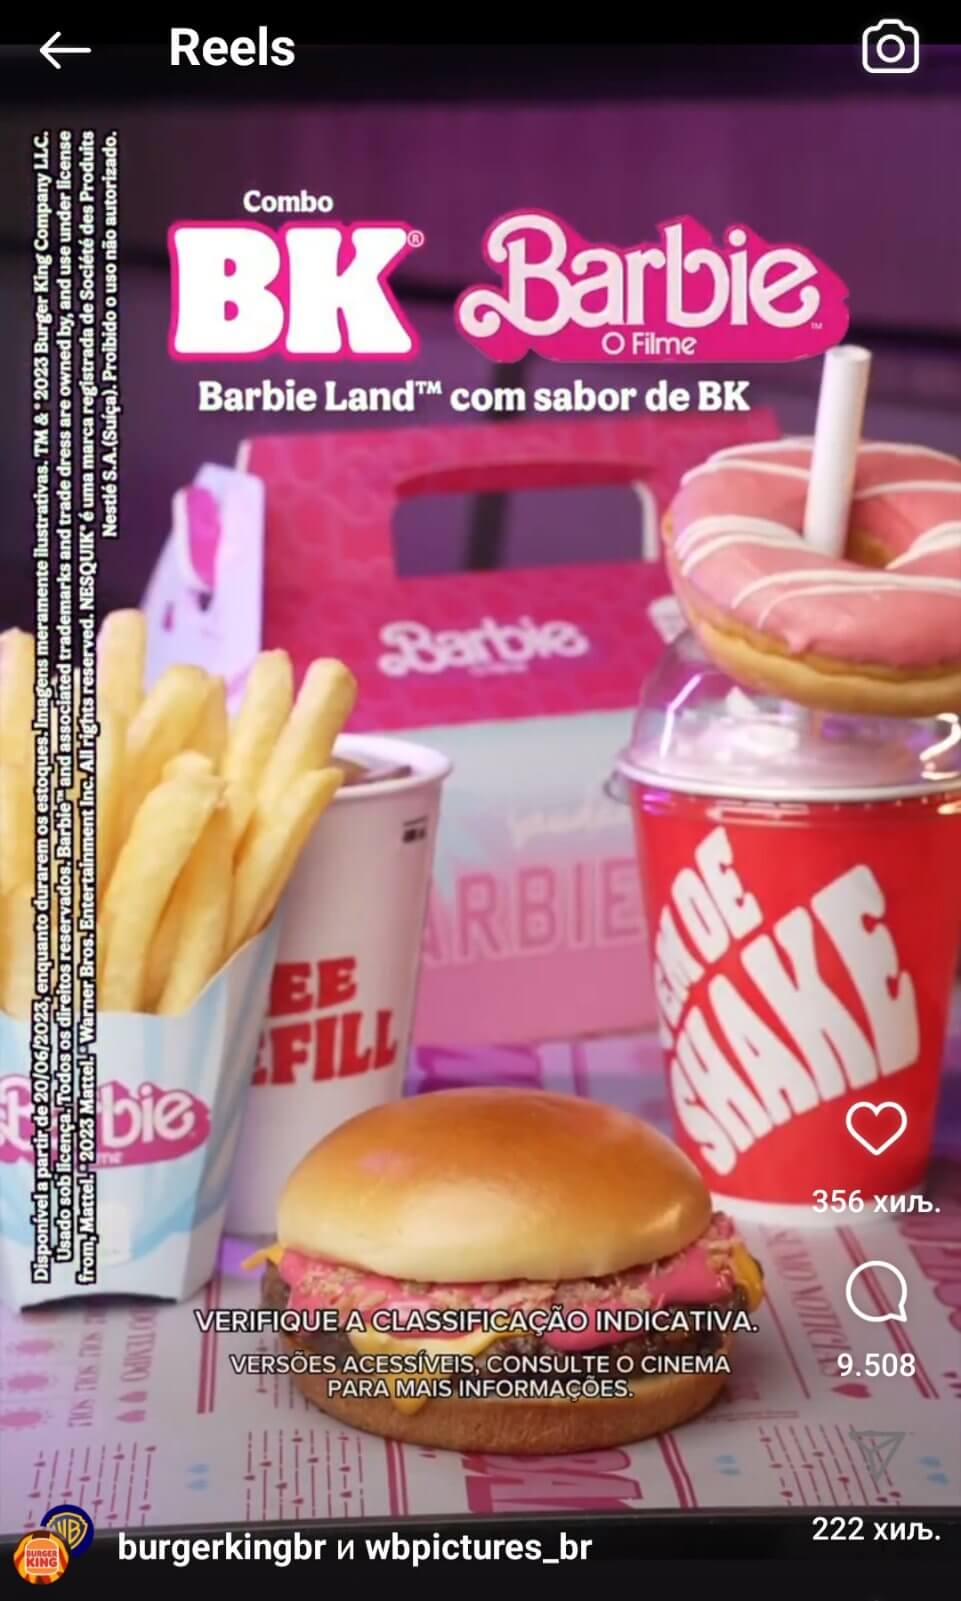 barbie and burger king collab